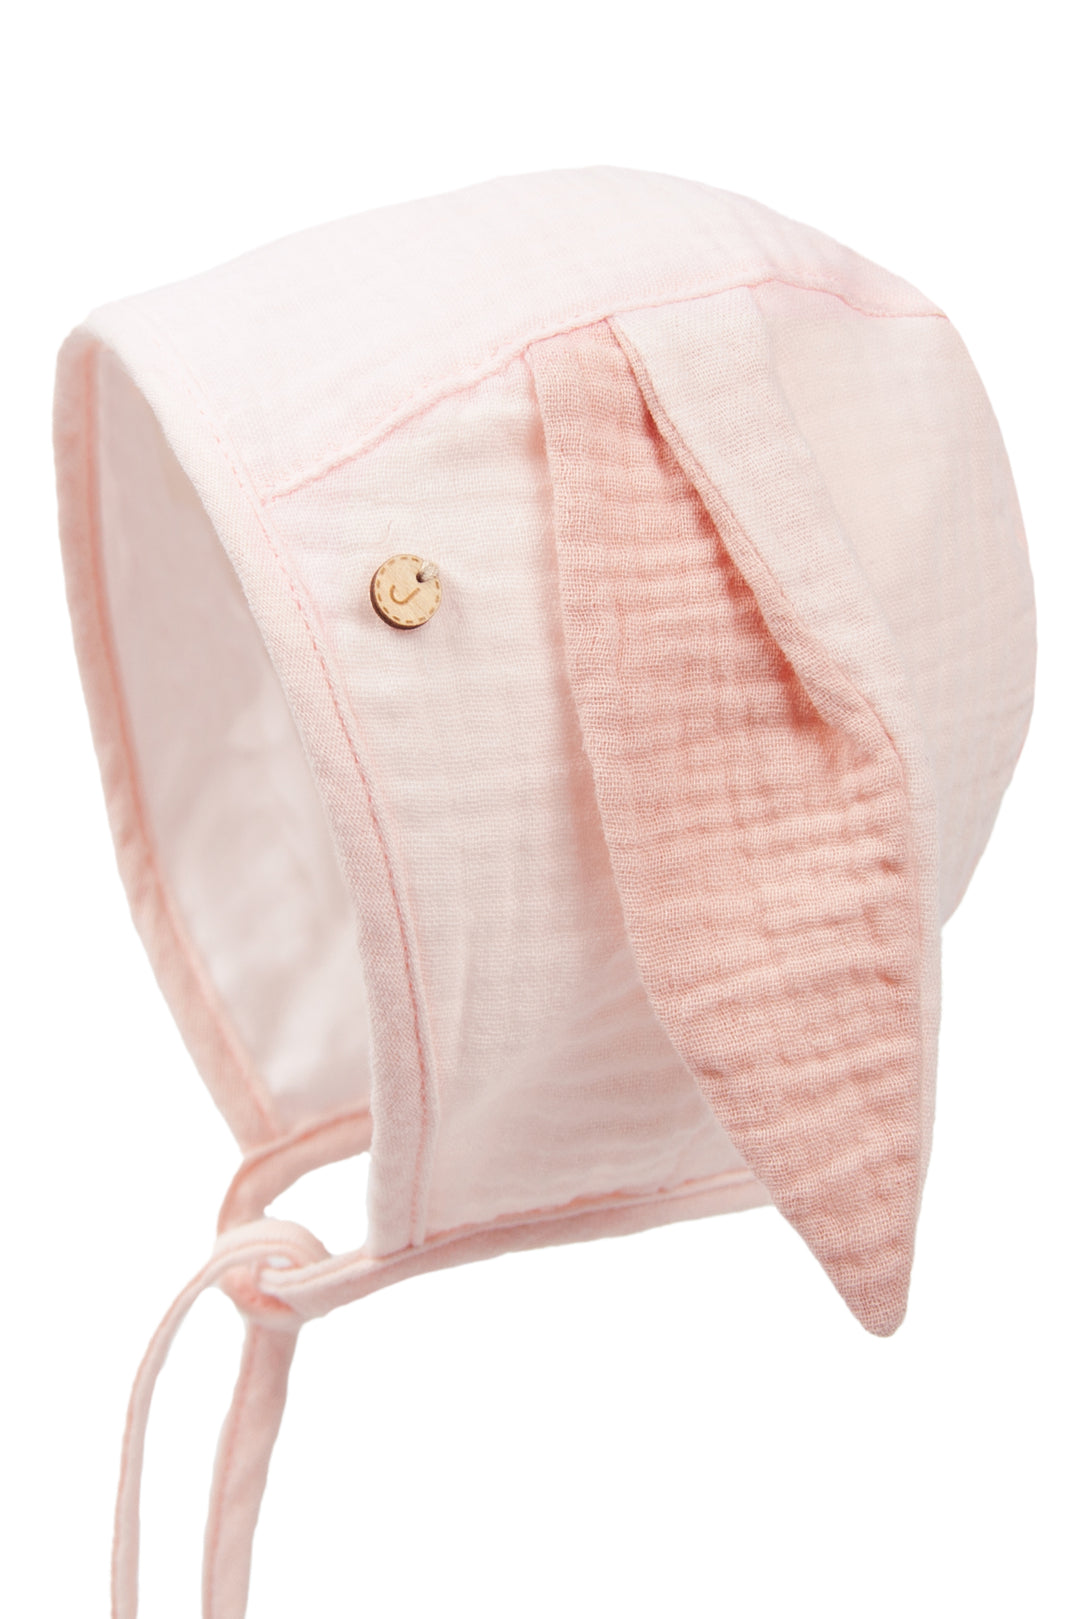 Jamiks "Siddy" Apricot Cheesecloth Bunny Hat | Millie and John